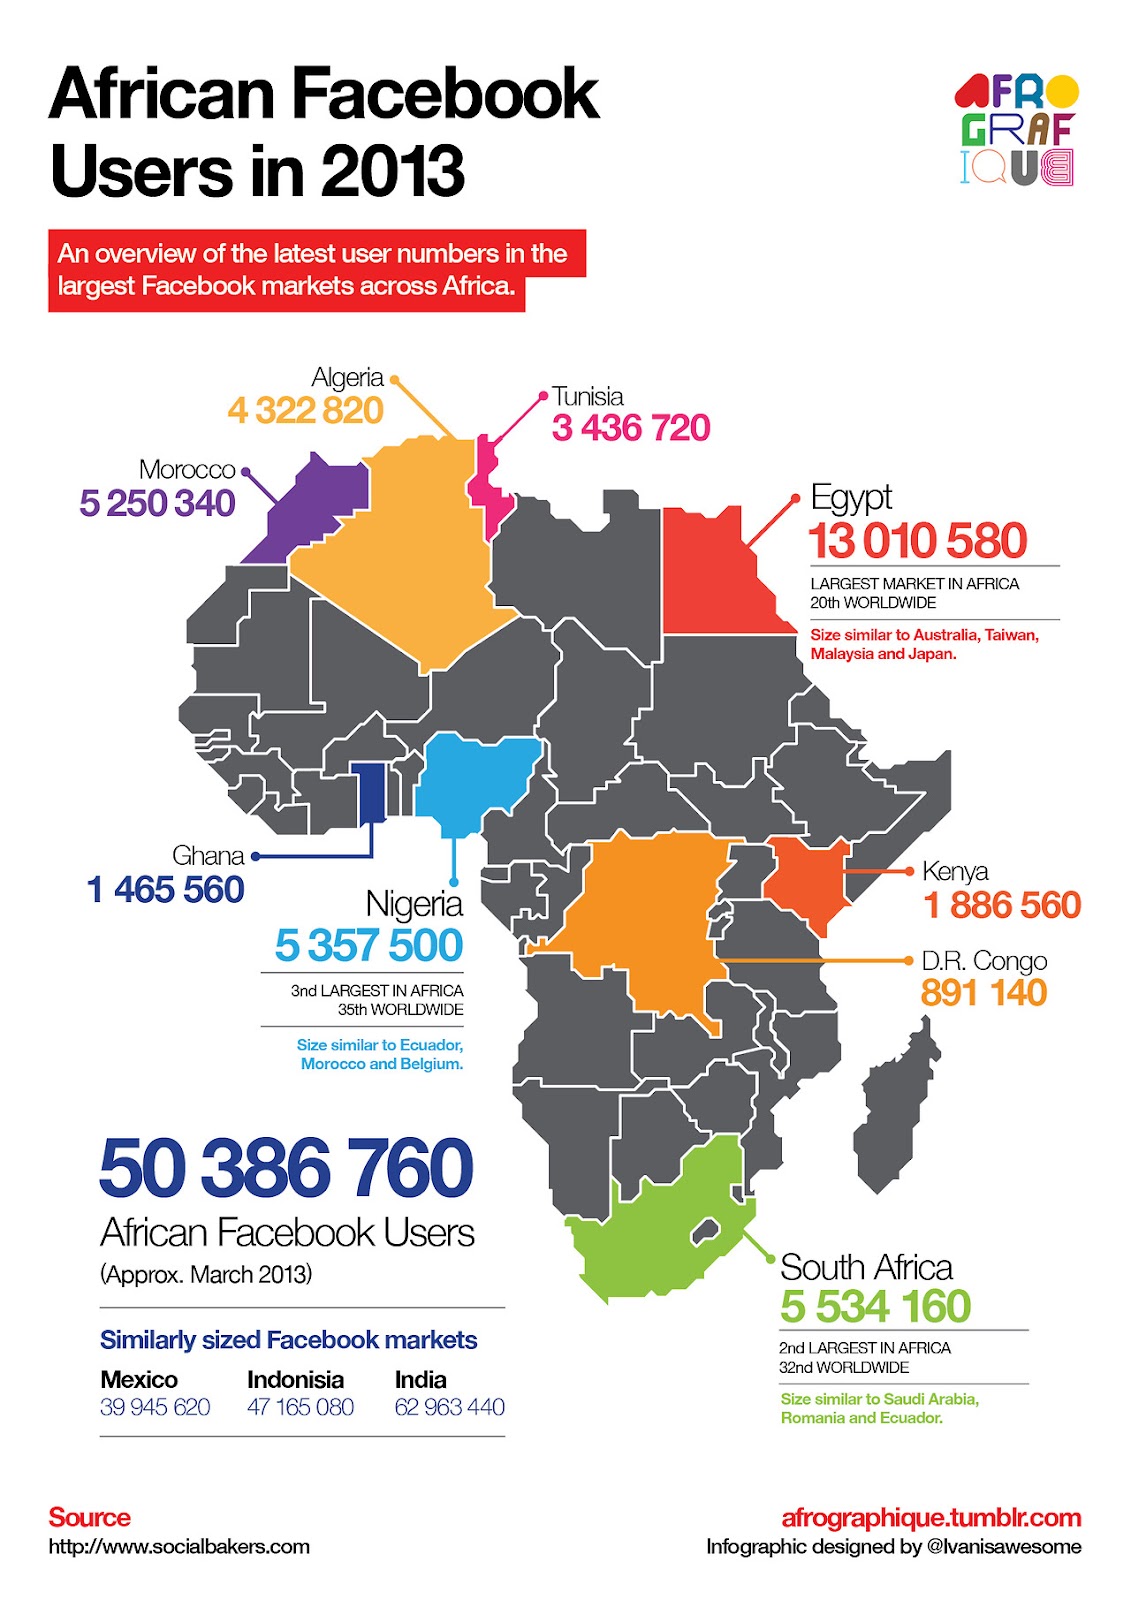 Africa-Facebook-users-Infographic.jpg